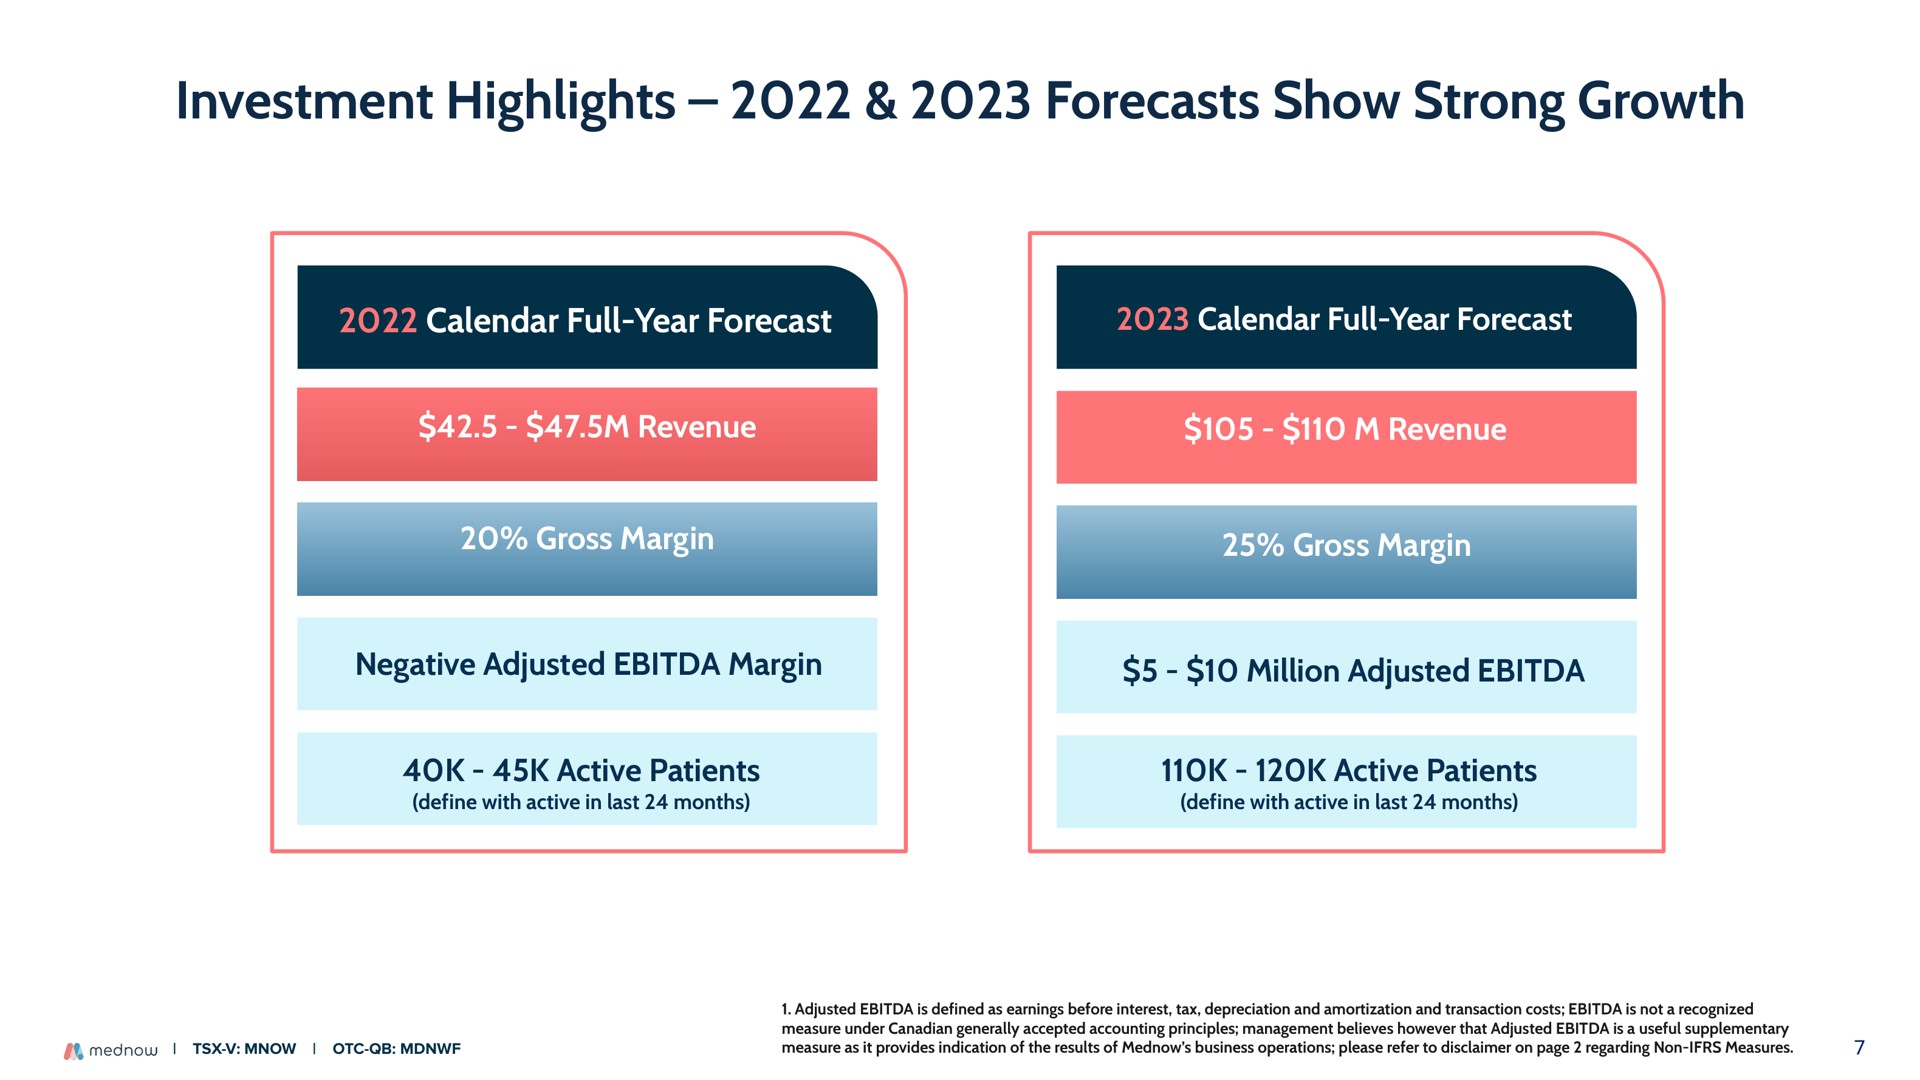 investment highlights forecasts show strong growth calendar full year forecast calendar full year forecast revenue revenue gross margin gross margin negative adjusted margin million adjusted active patients define with active in last months active patients define with active in last months | Mednow